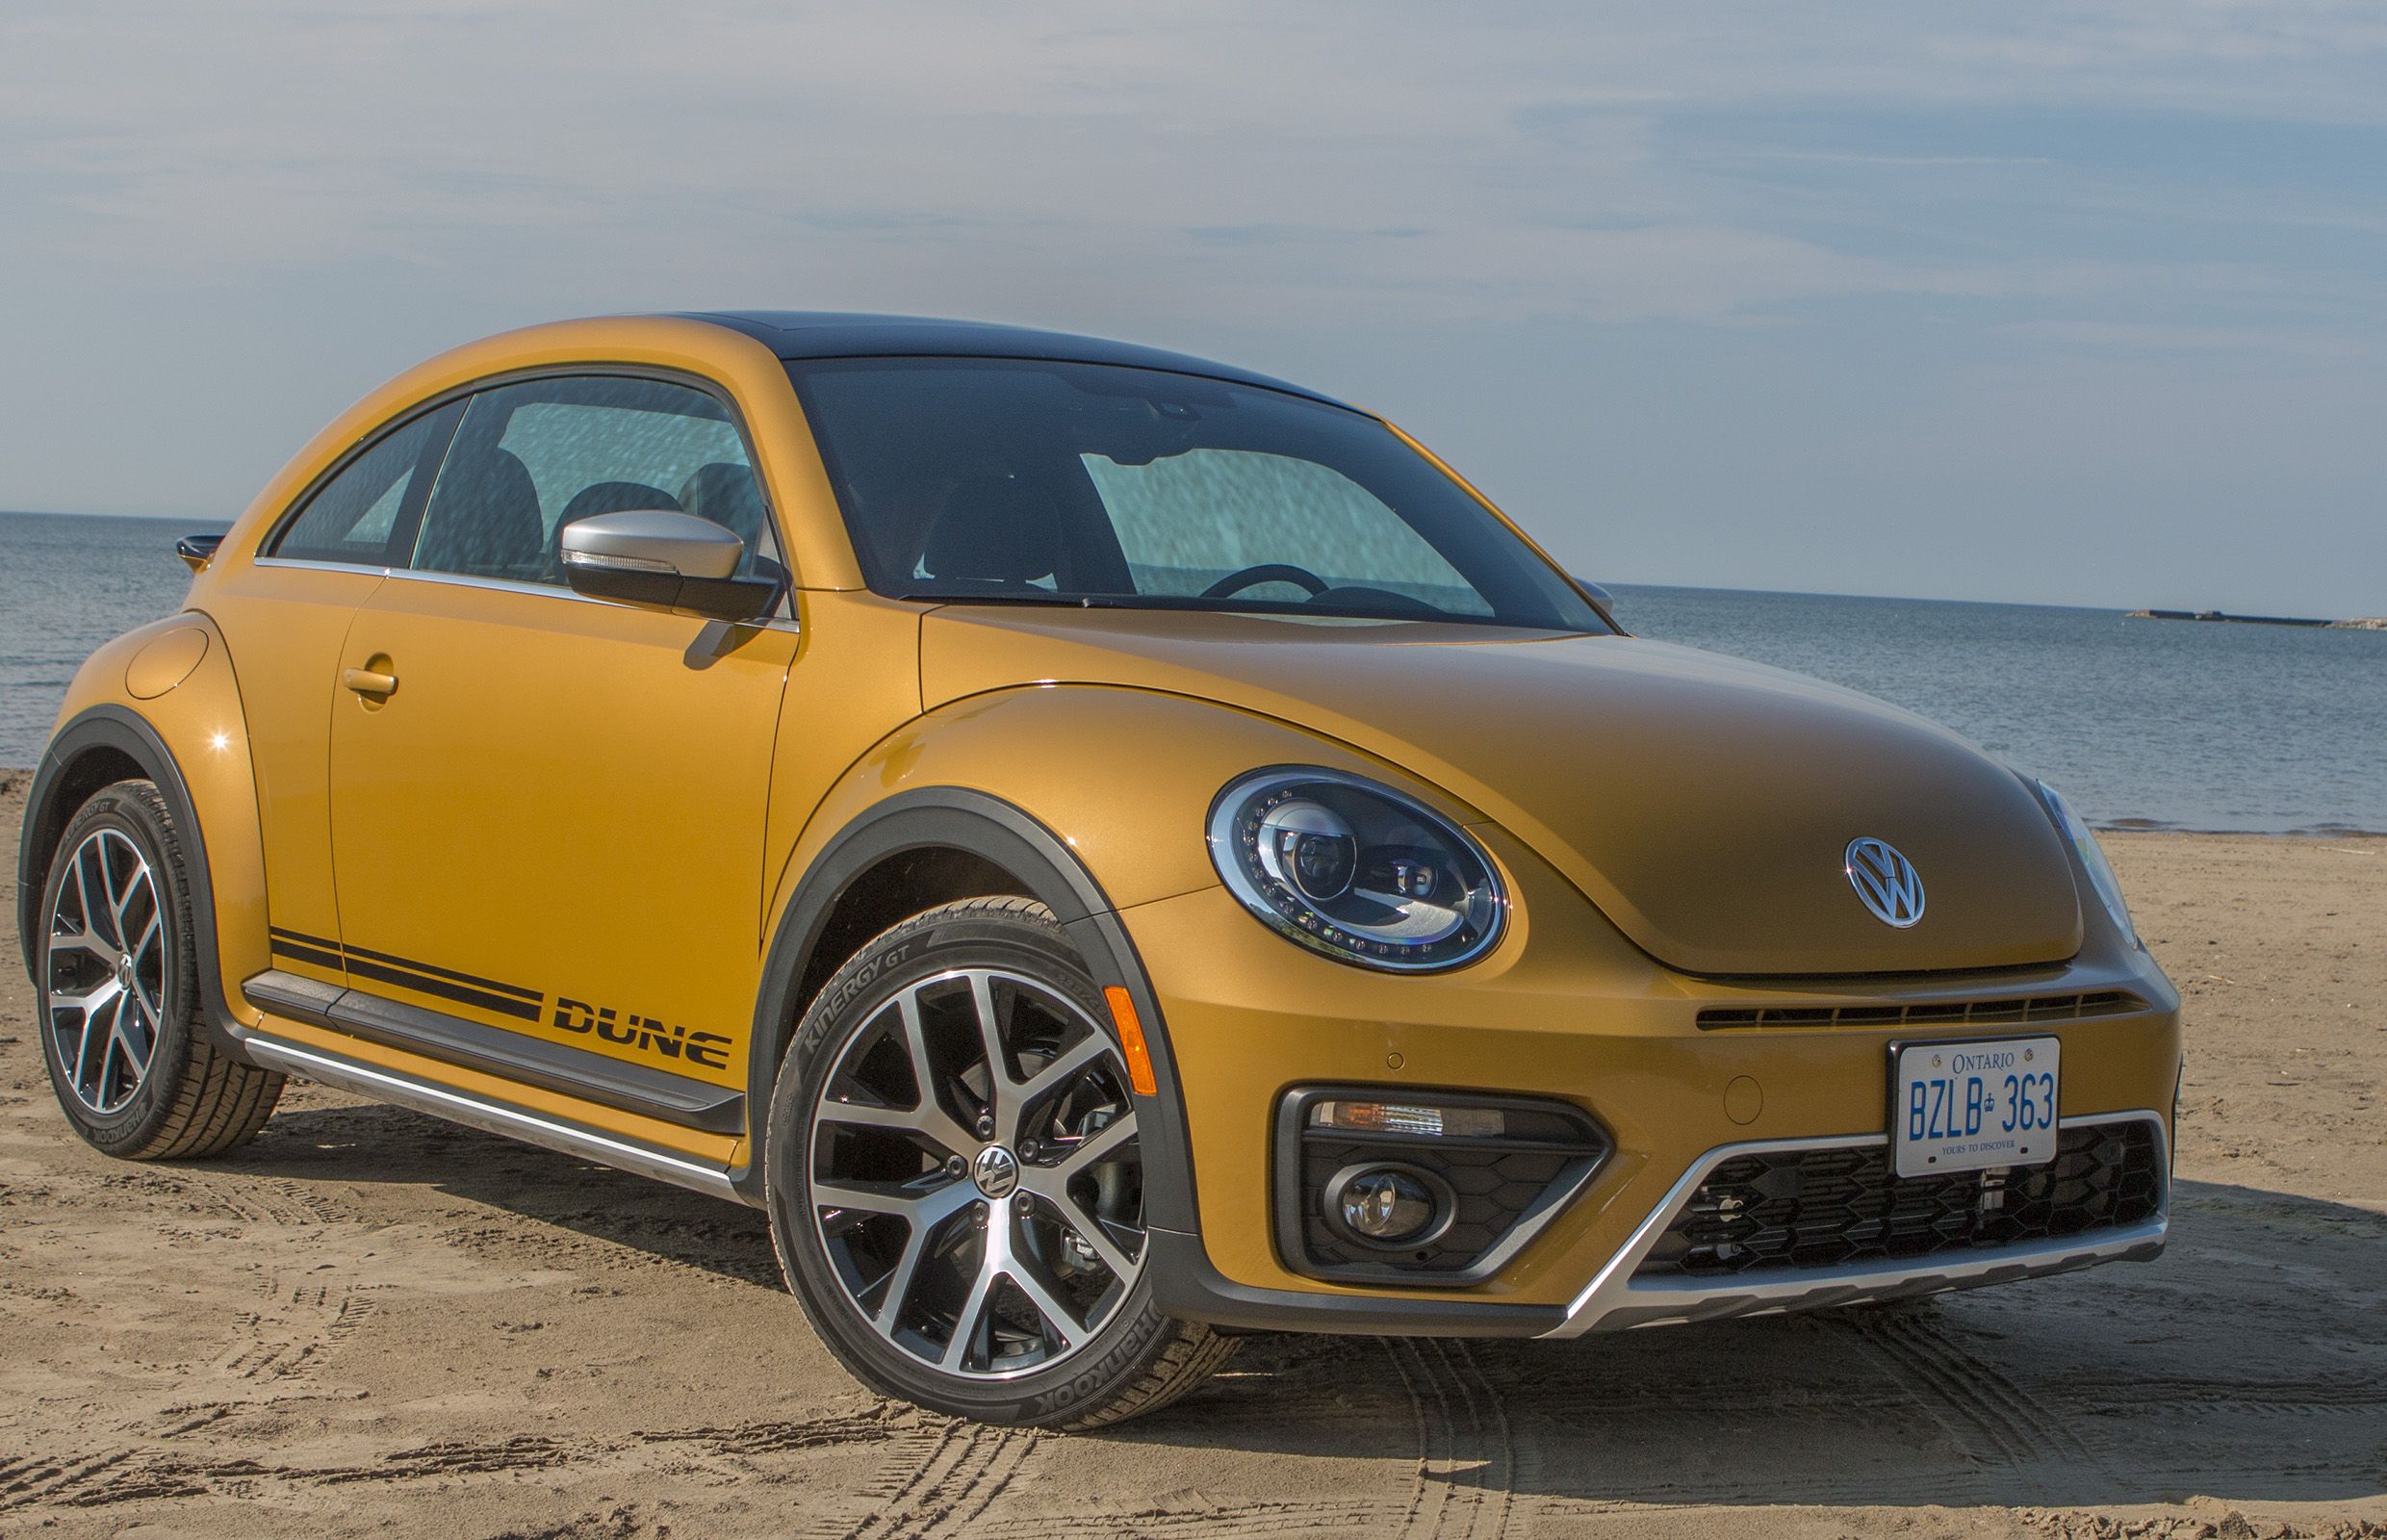 The VW Beetle could come back as a four-door EV